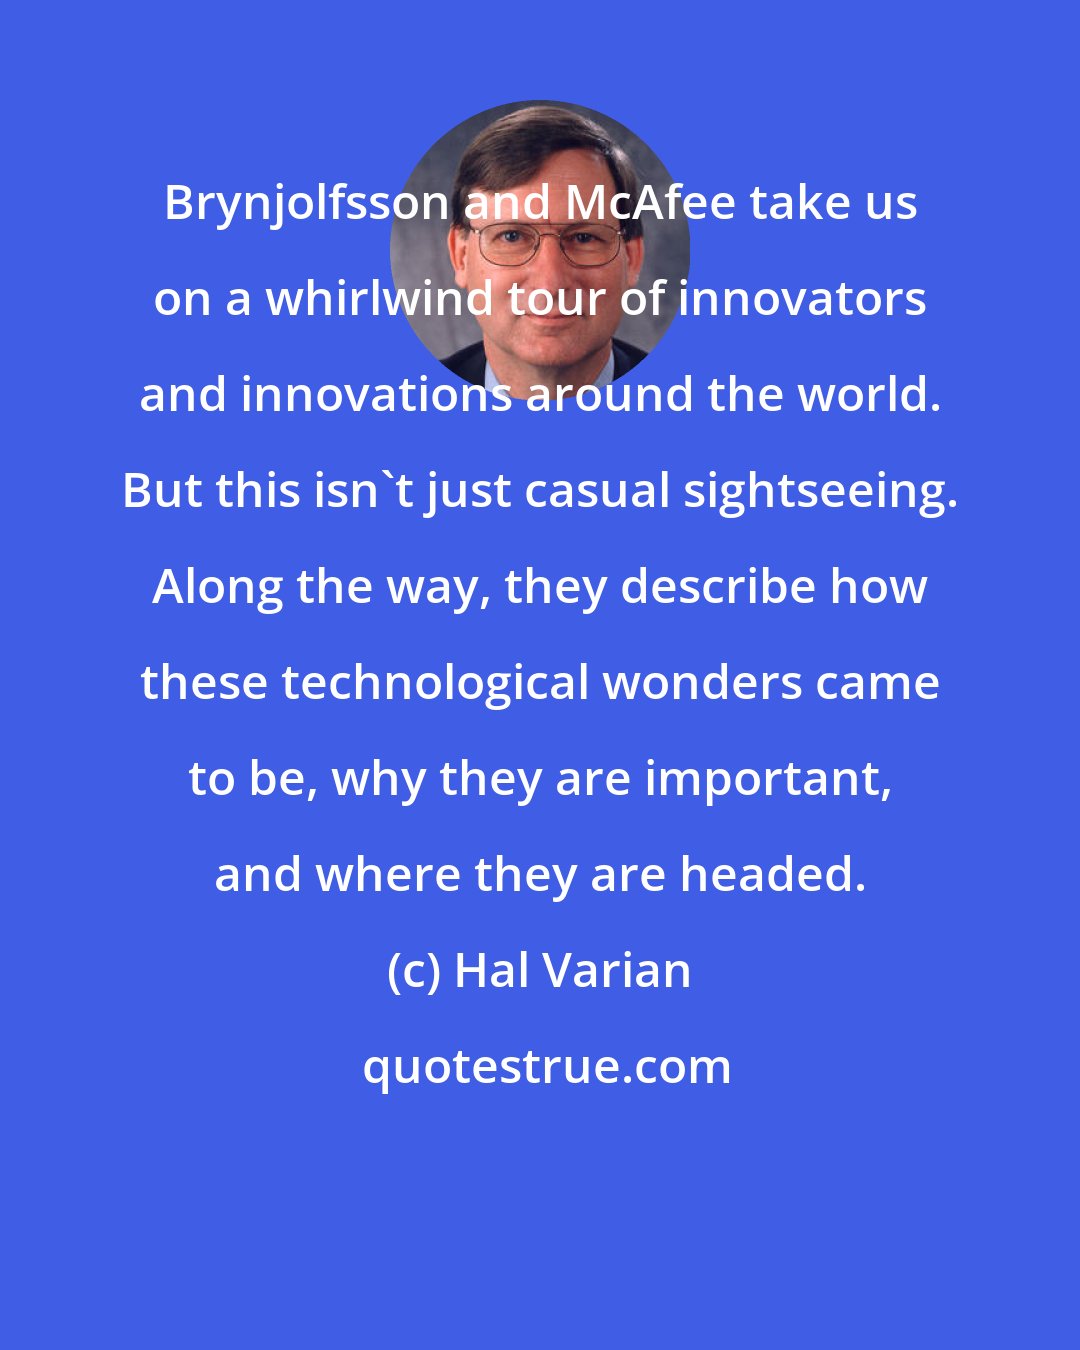 Hal Varian: Brynjolfsson and McAfee take us on a whirlwind tour of innovators and innovations around the world. But this isn't just casual sightseeing. Along the way, they describe how these technological wonders came to be, why they are important, and where they are headed.